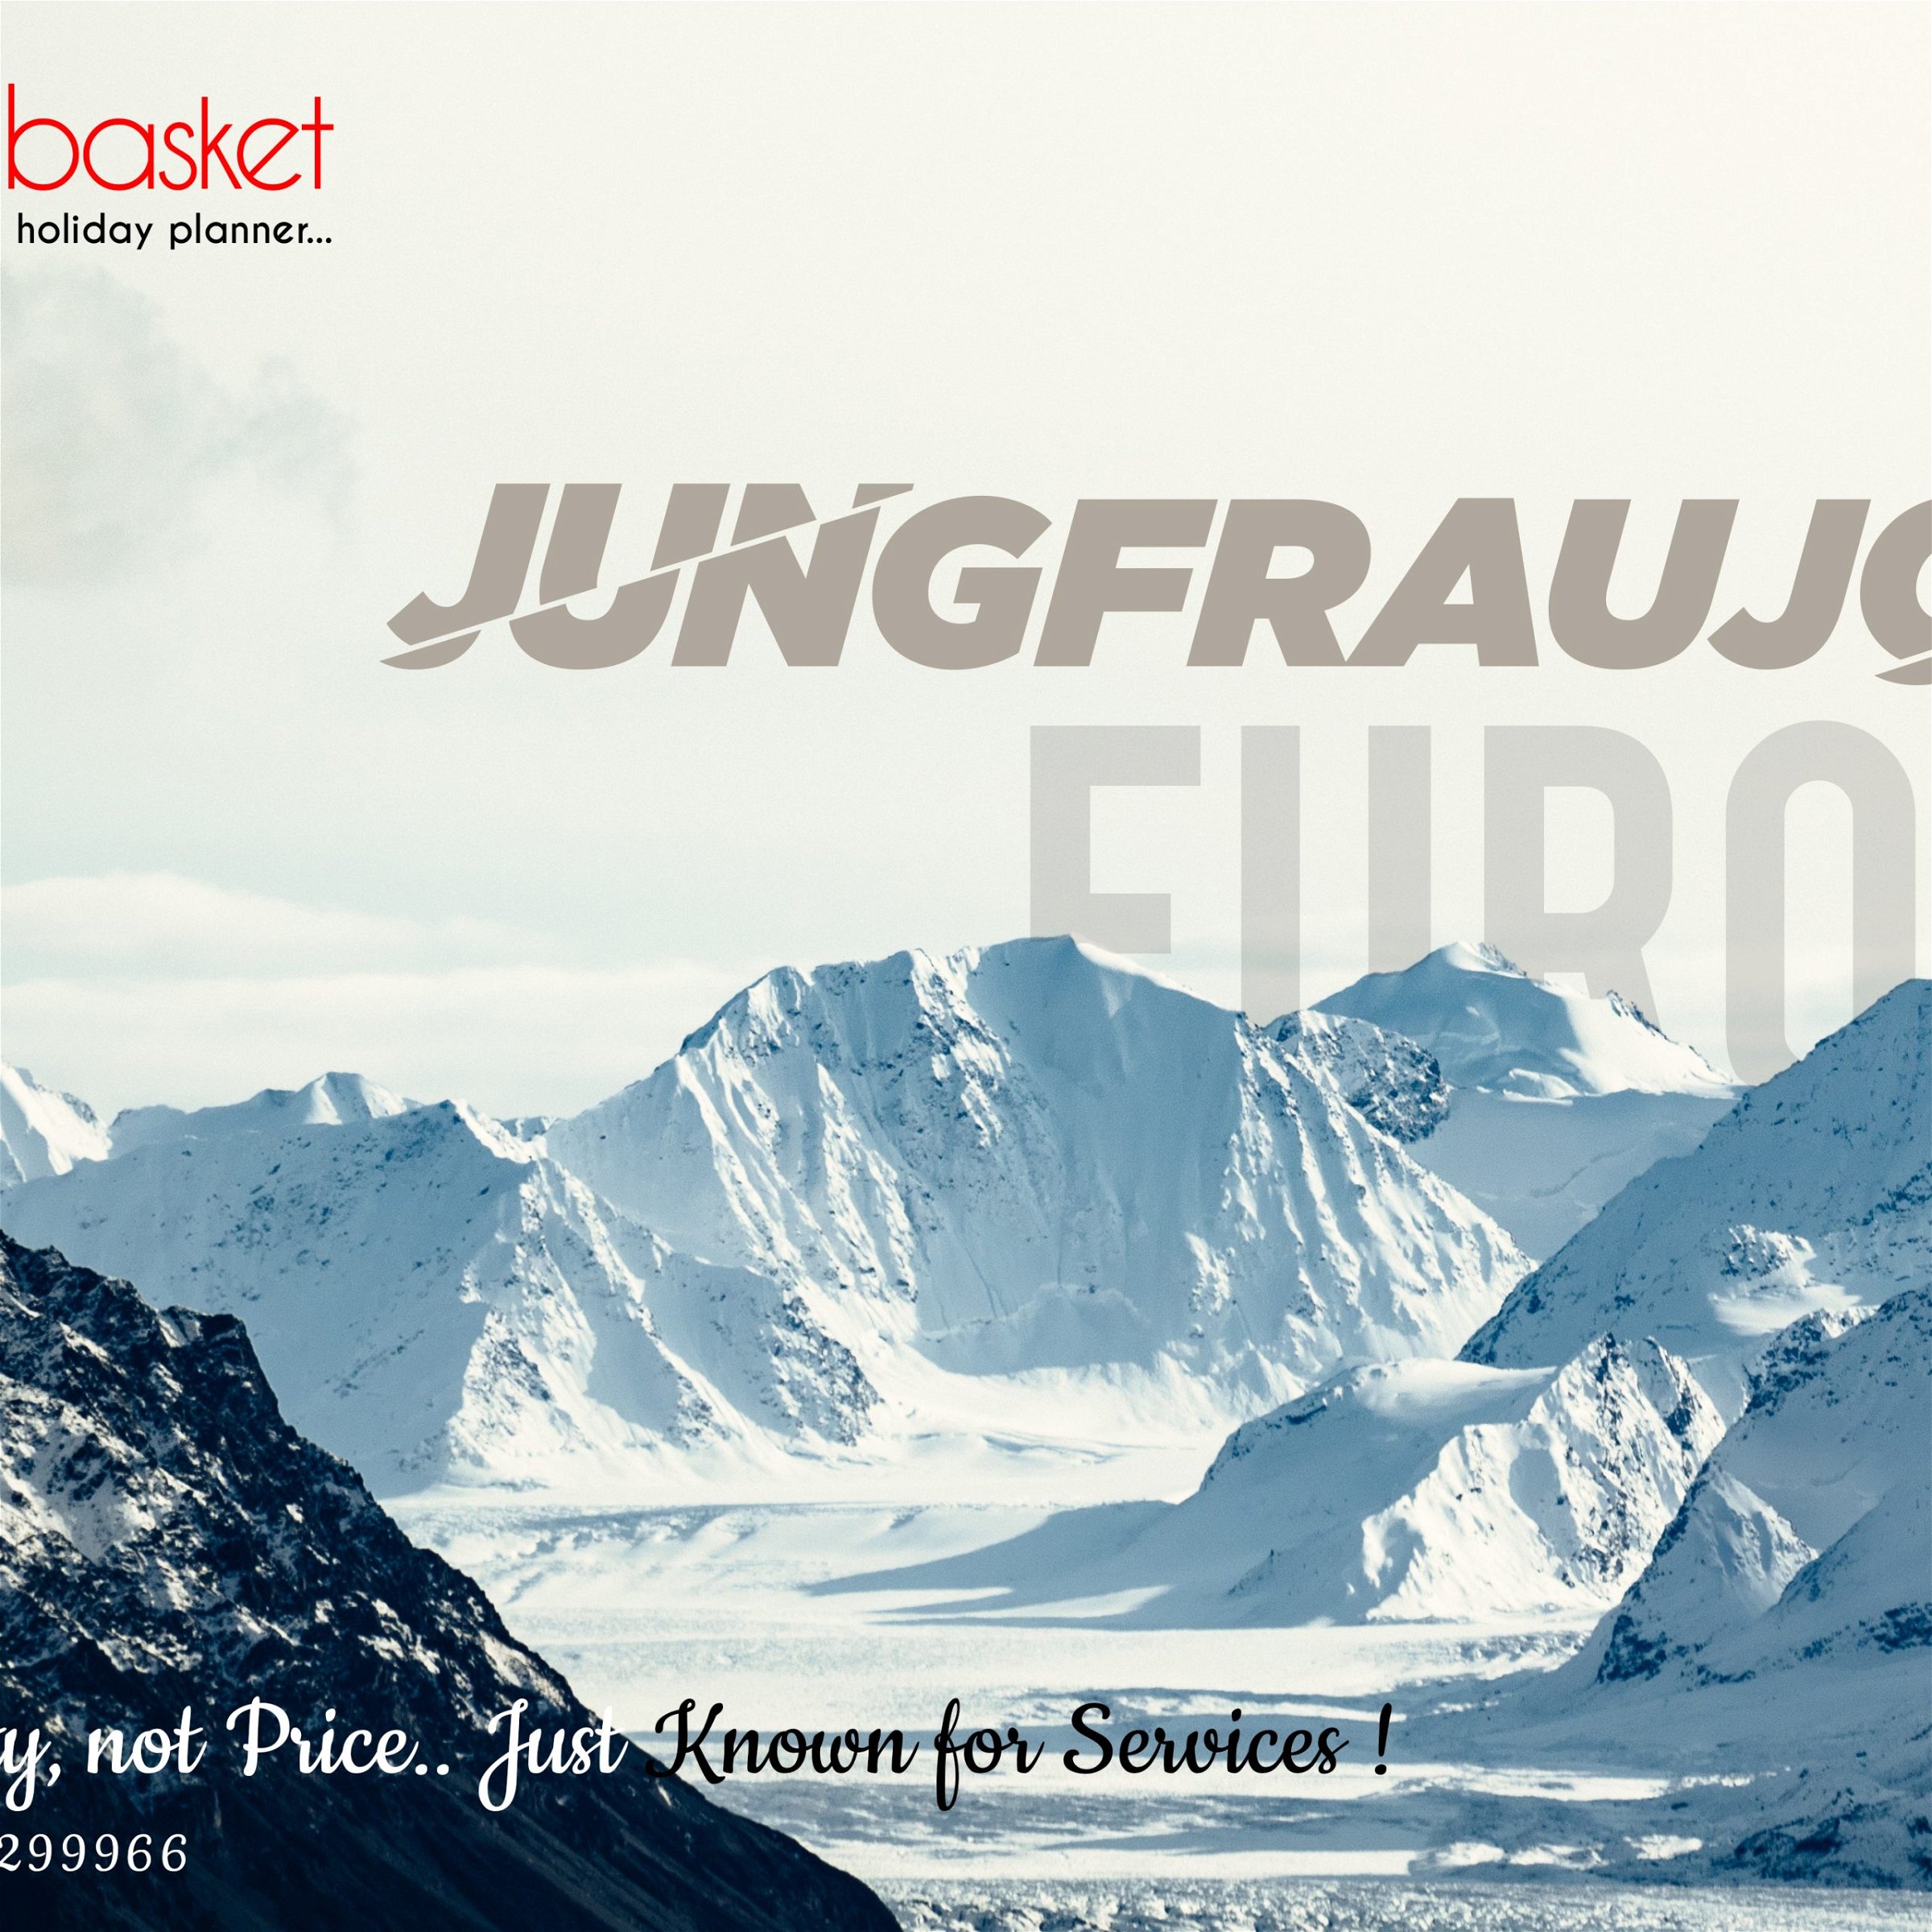 Day 6 - Highlight of the tour, A magical alpine excursion to the top of Europe - the amazing Jungfraujoch and scenic Interlaken